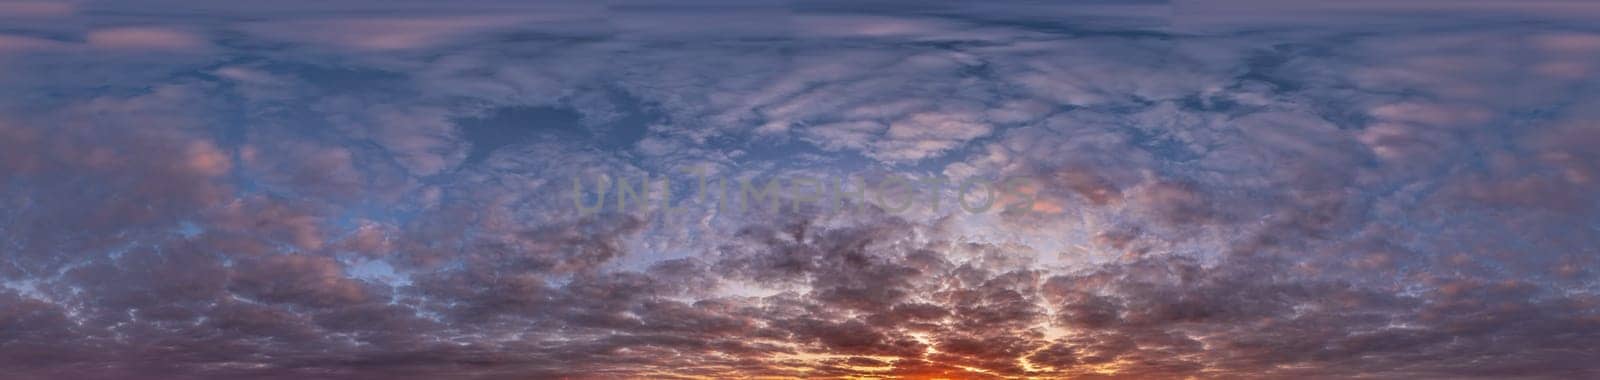 panorama of dark blue sunset sky with Stratocumulus clouds without ground, for easy use in game development, 3D graphics and composites in aerial drone 360 degree spherical panoramas as a sky dome.